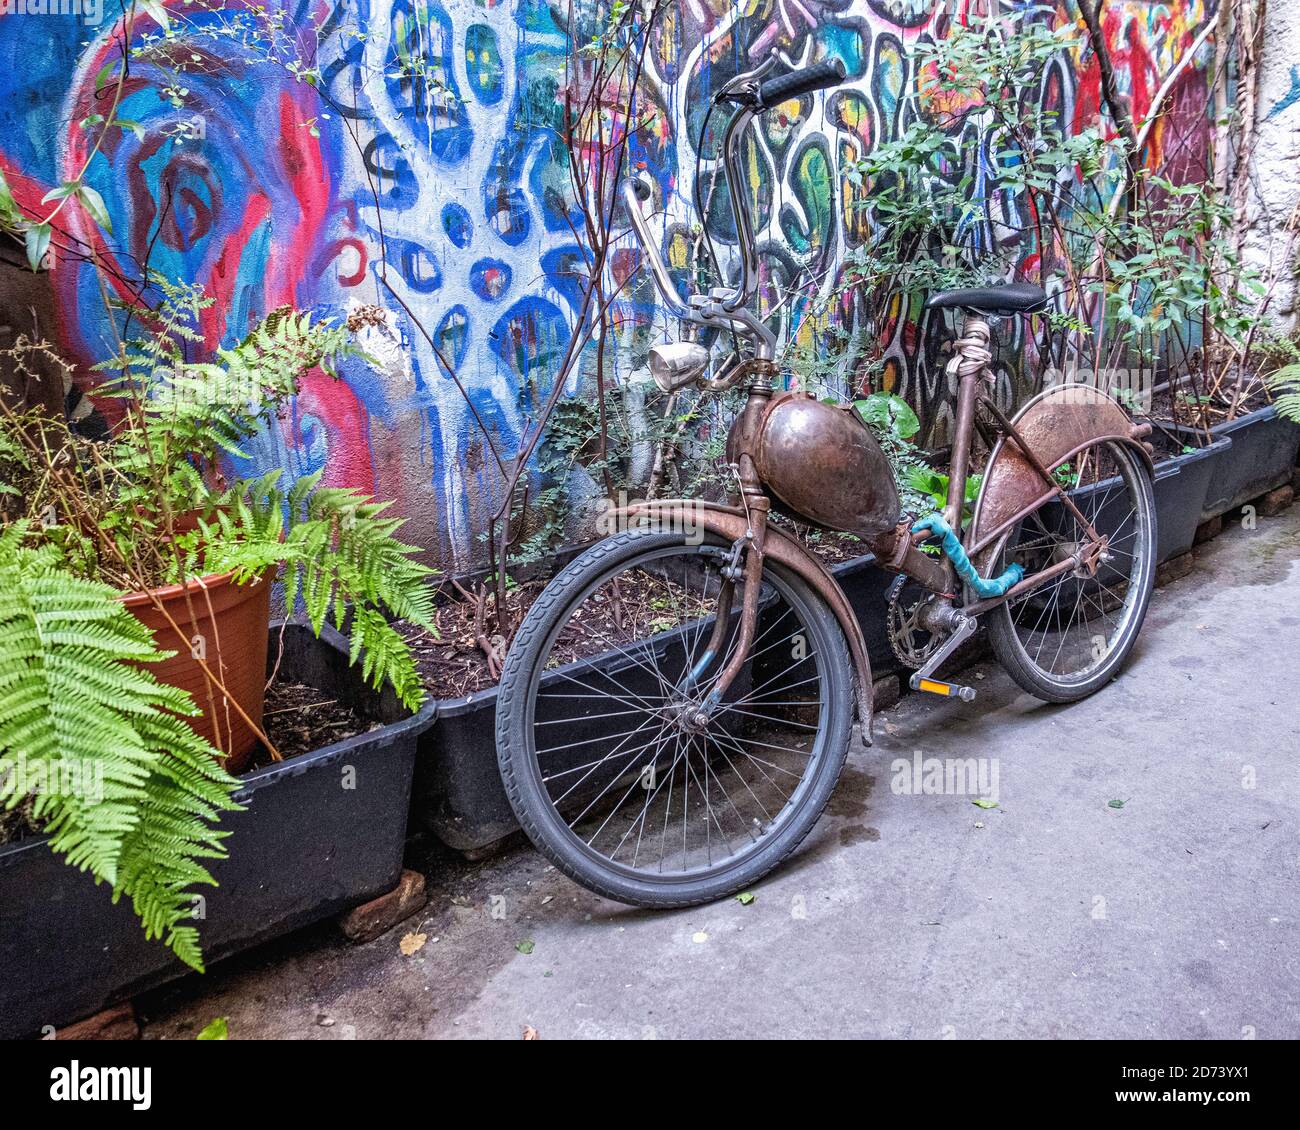 Unusual Bicycle parked next to pot plants at Haus Schwarzenberg art & culture venue, 39 Rosenthaler Strasse, Mitte, Berlin. Stock Photo